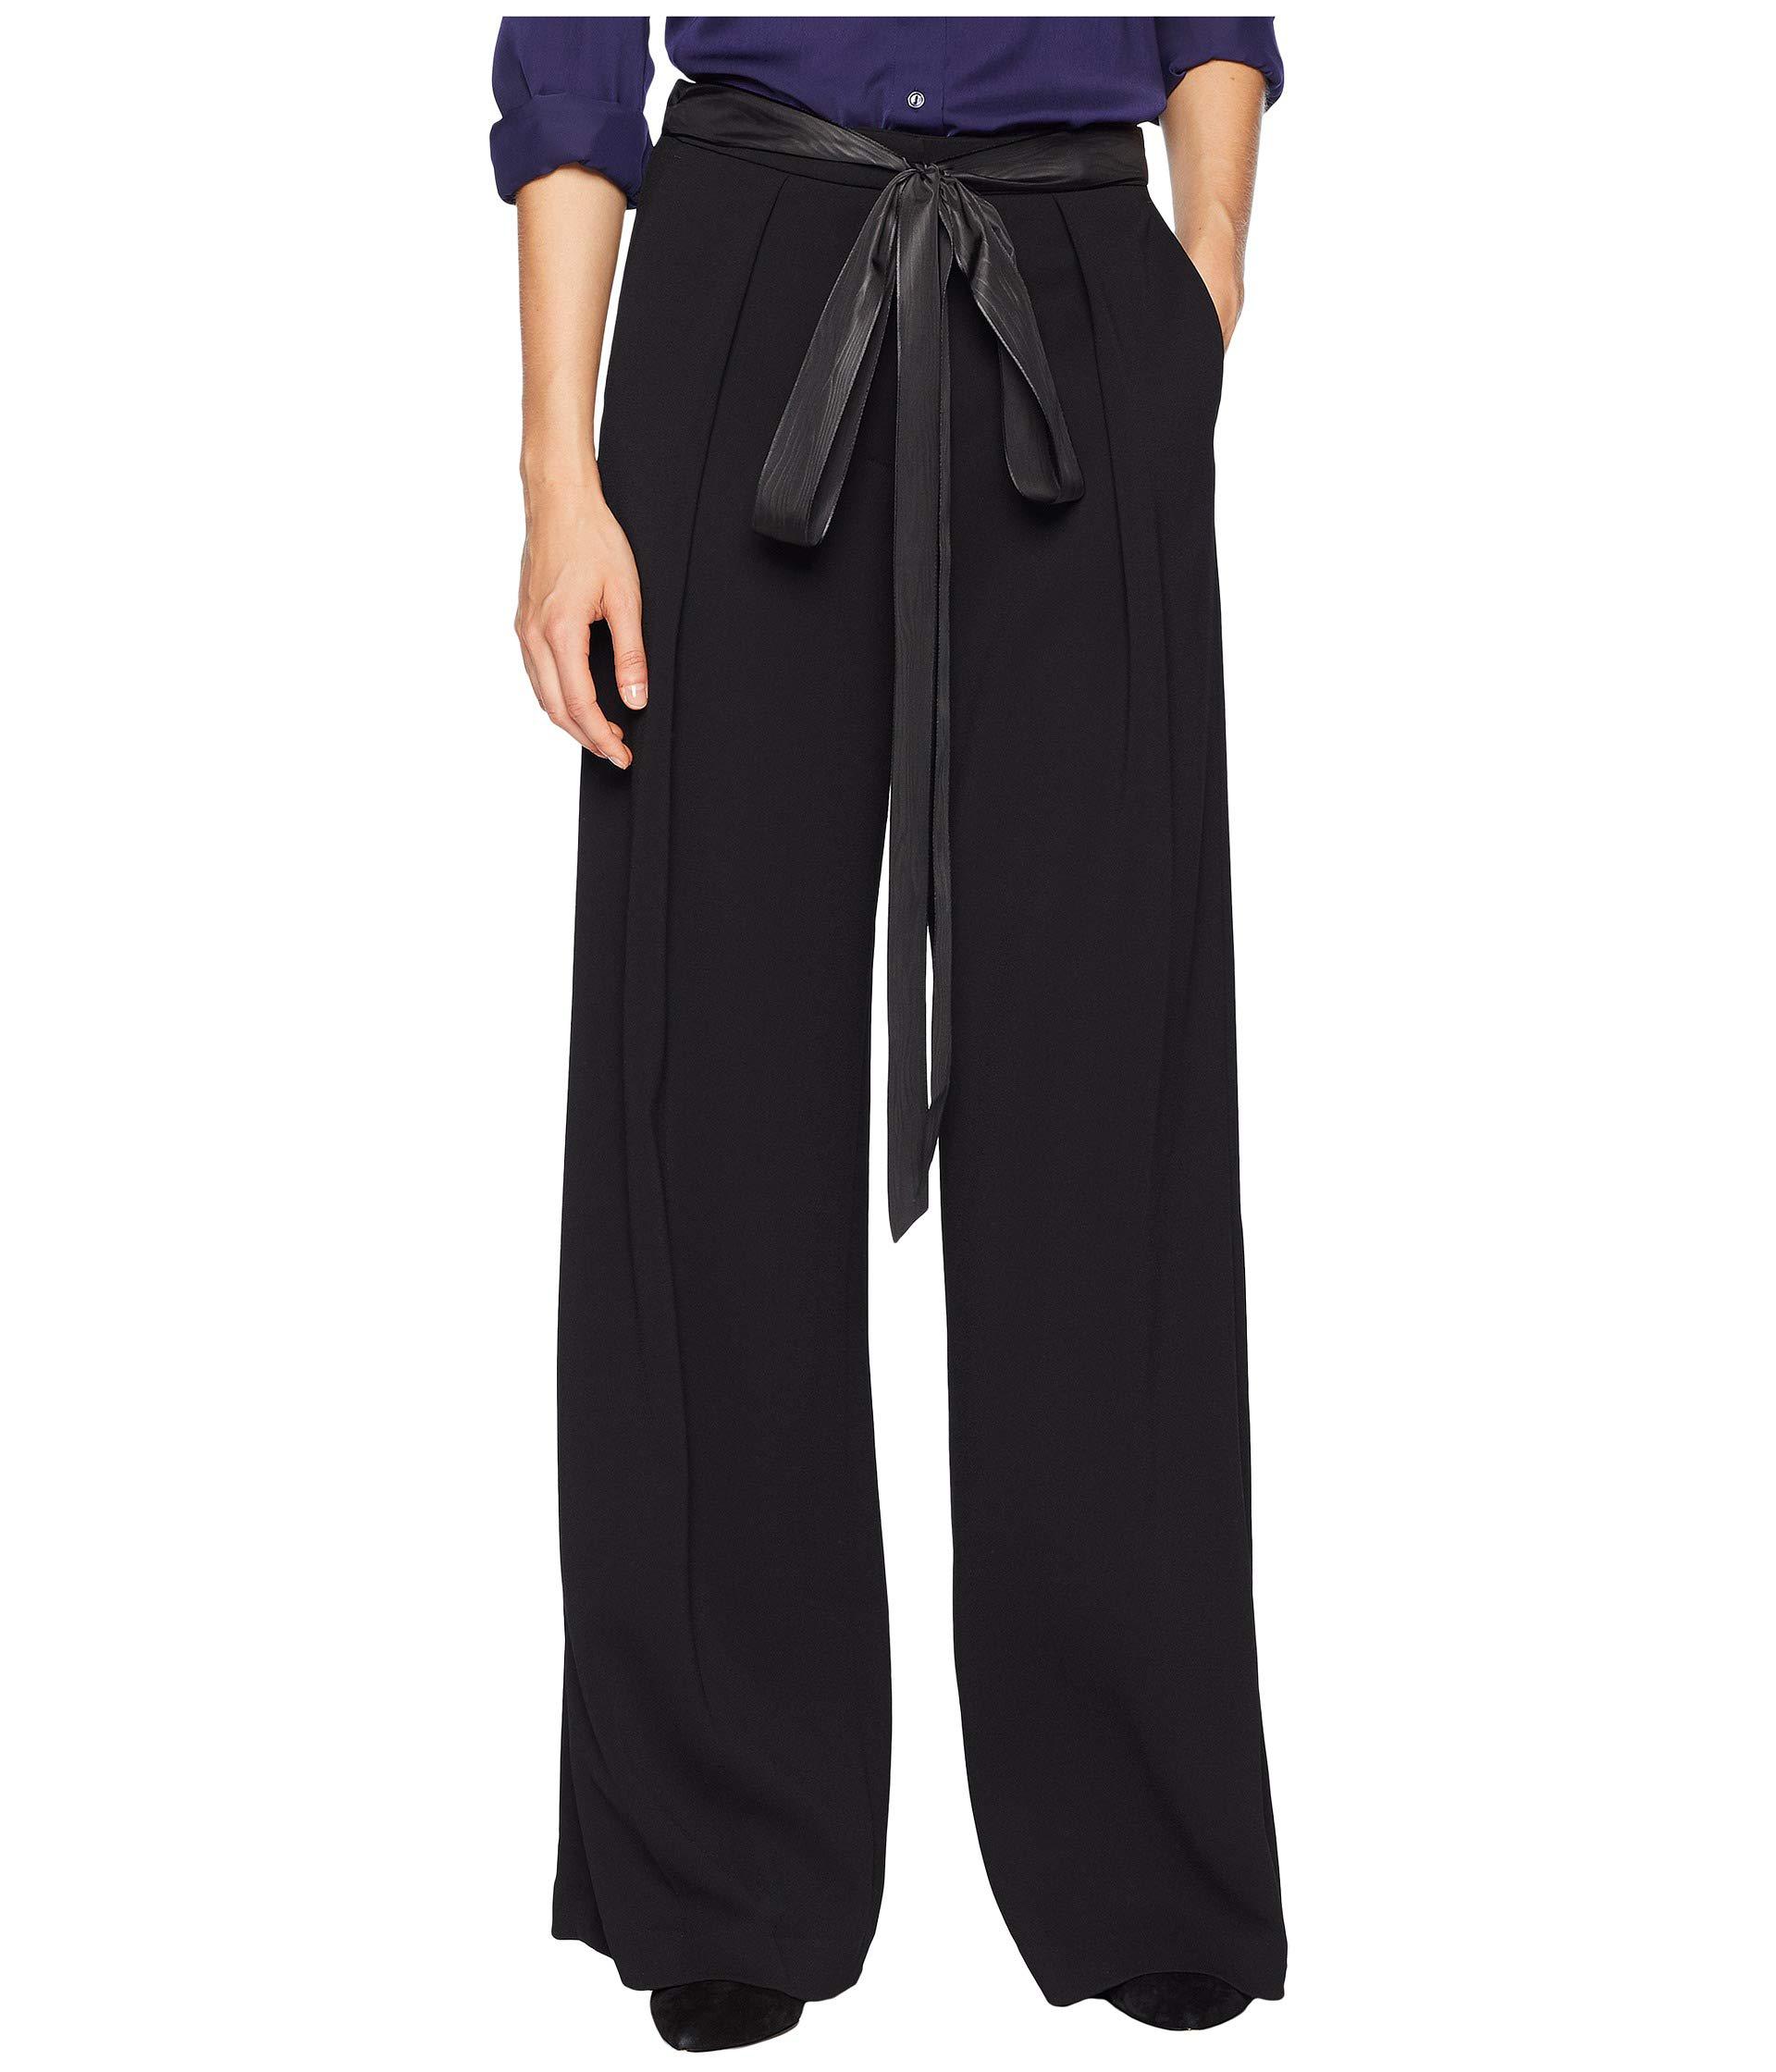 Lyst - Adam Lippes Stretch Crepe Trousers W/ Inverted Pleats (black ...